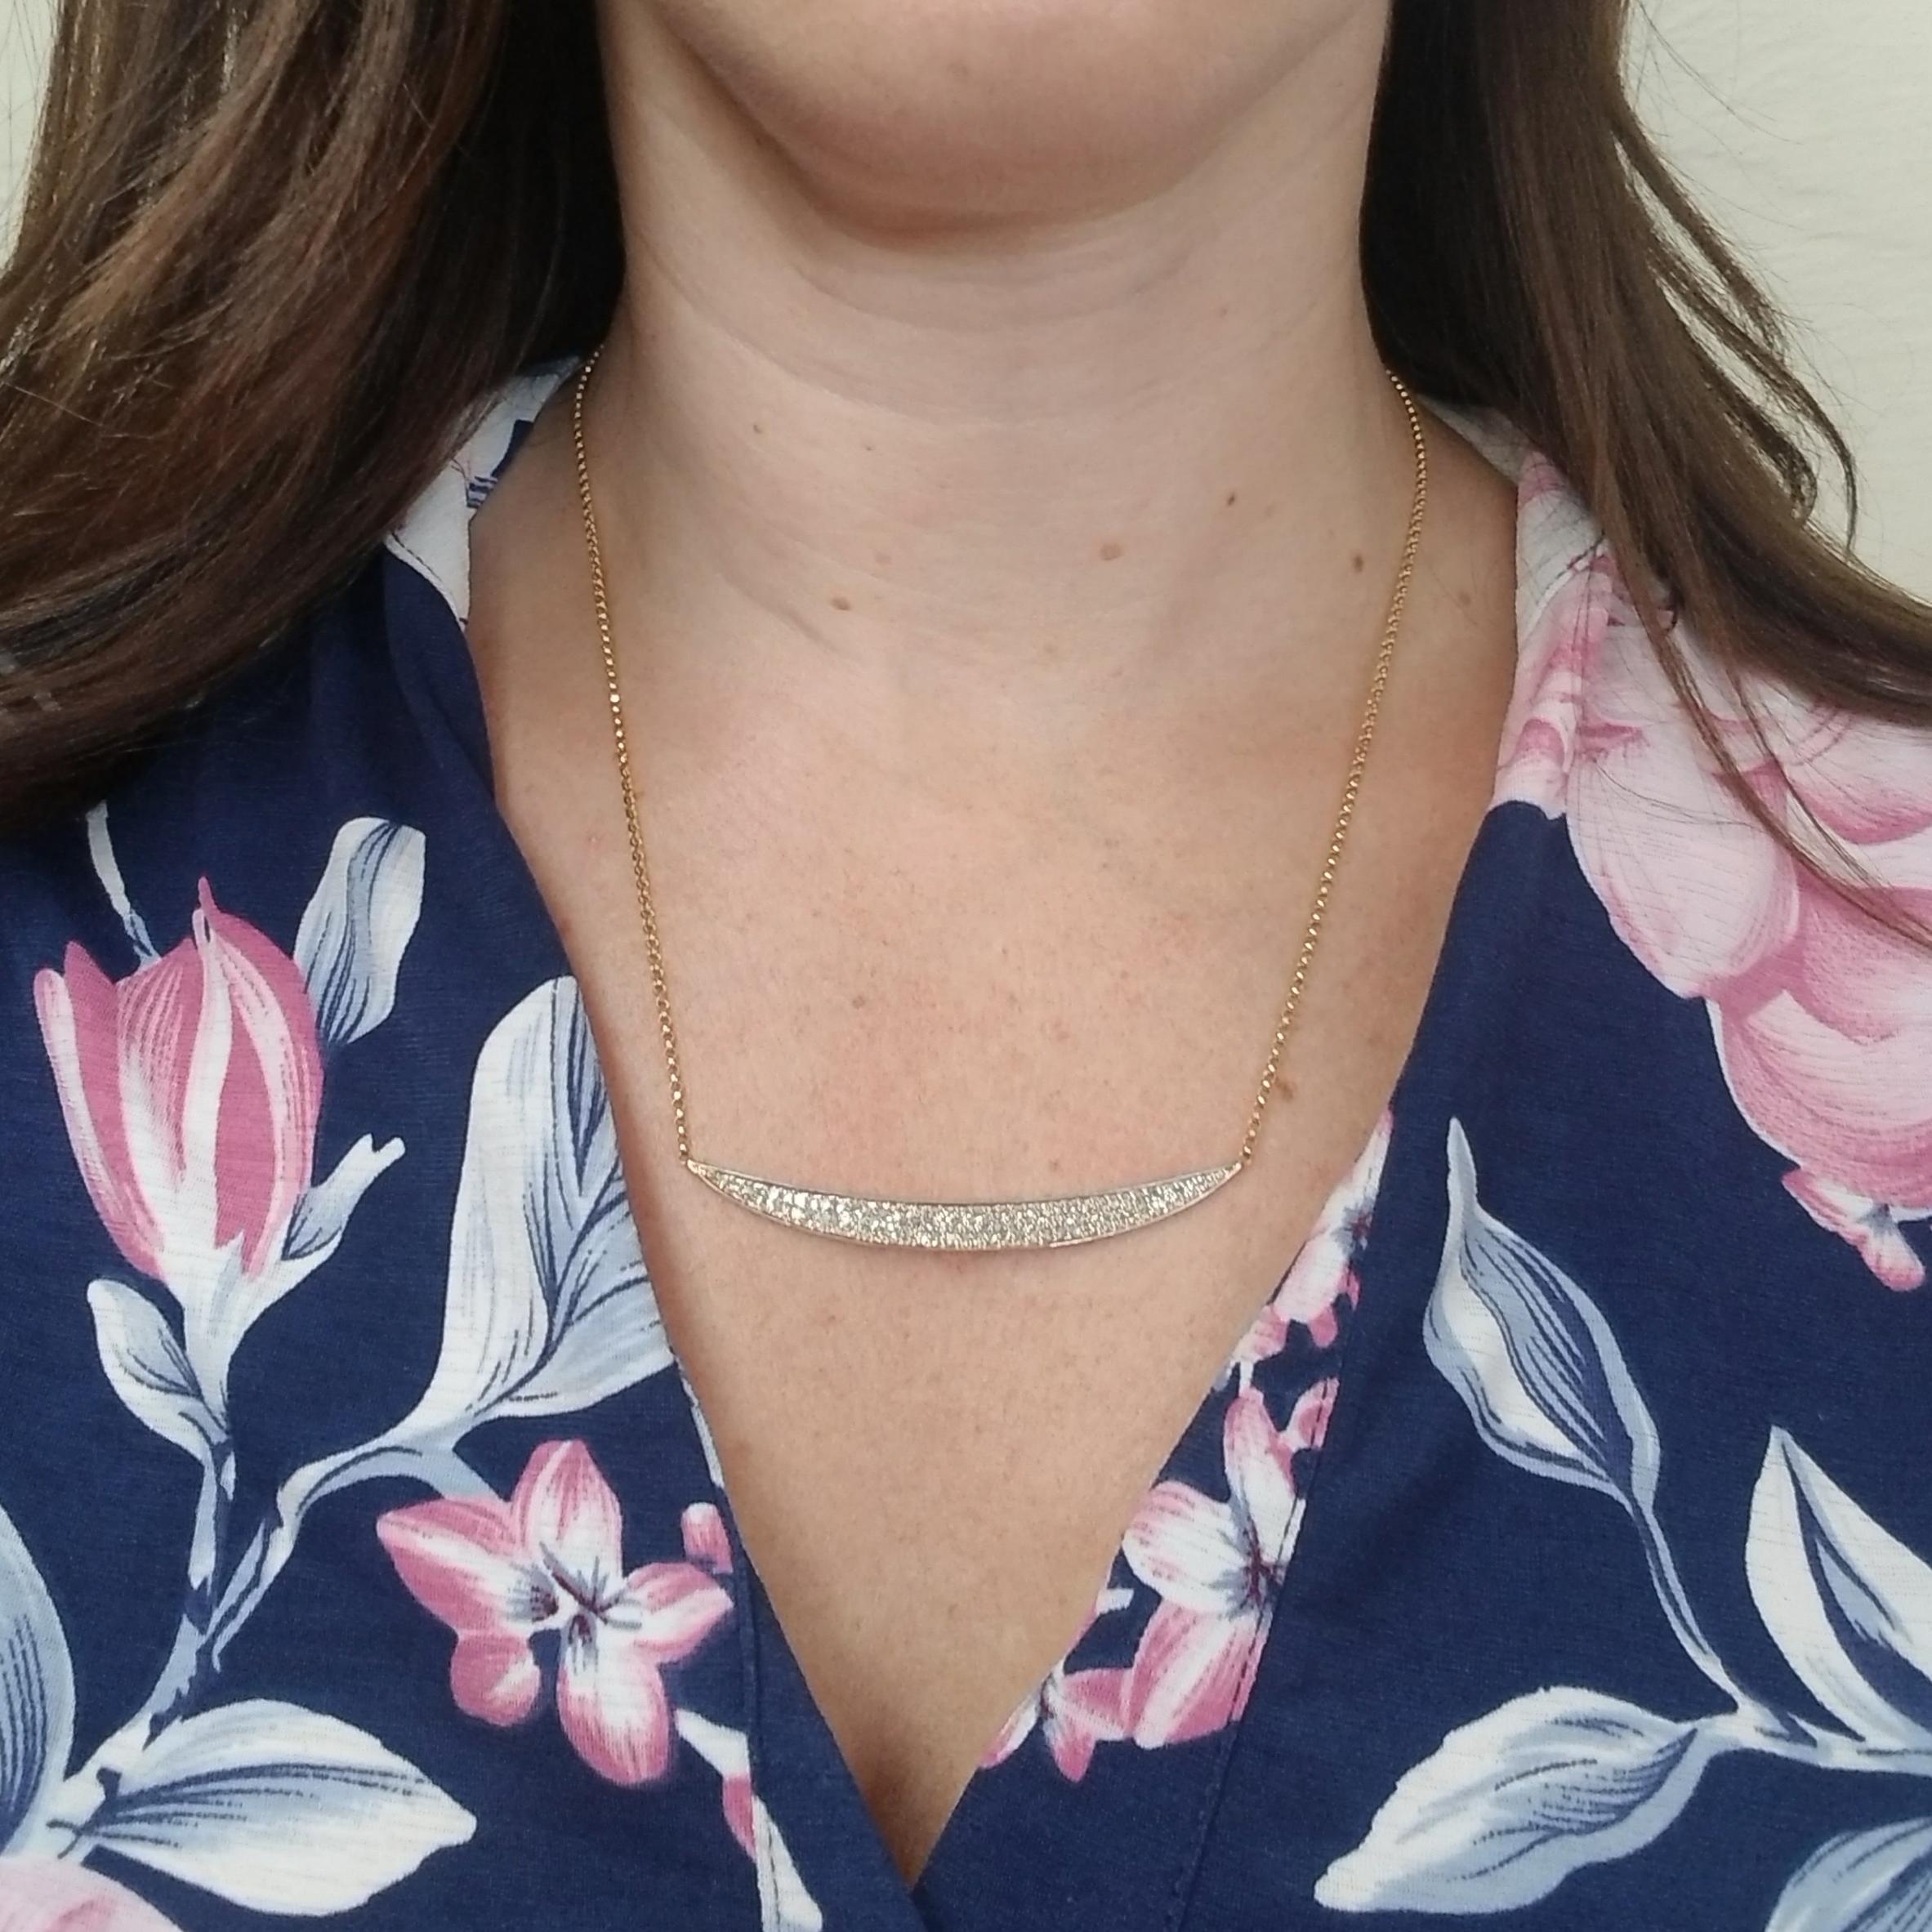 14 Karat Yellow Gold Curved Necklace Featuring 86 Round Brilliant Cut Diamonds Totaling Approximately 1 Carat Total Weight. The Diamonds Are Pave Set & Graded As SI Clarity & I Color. Chain Length is 18 Inches With Lobster Clasp.